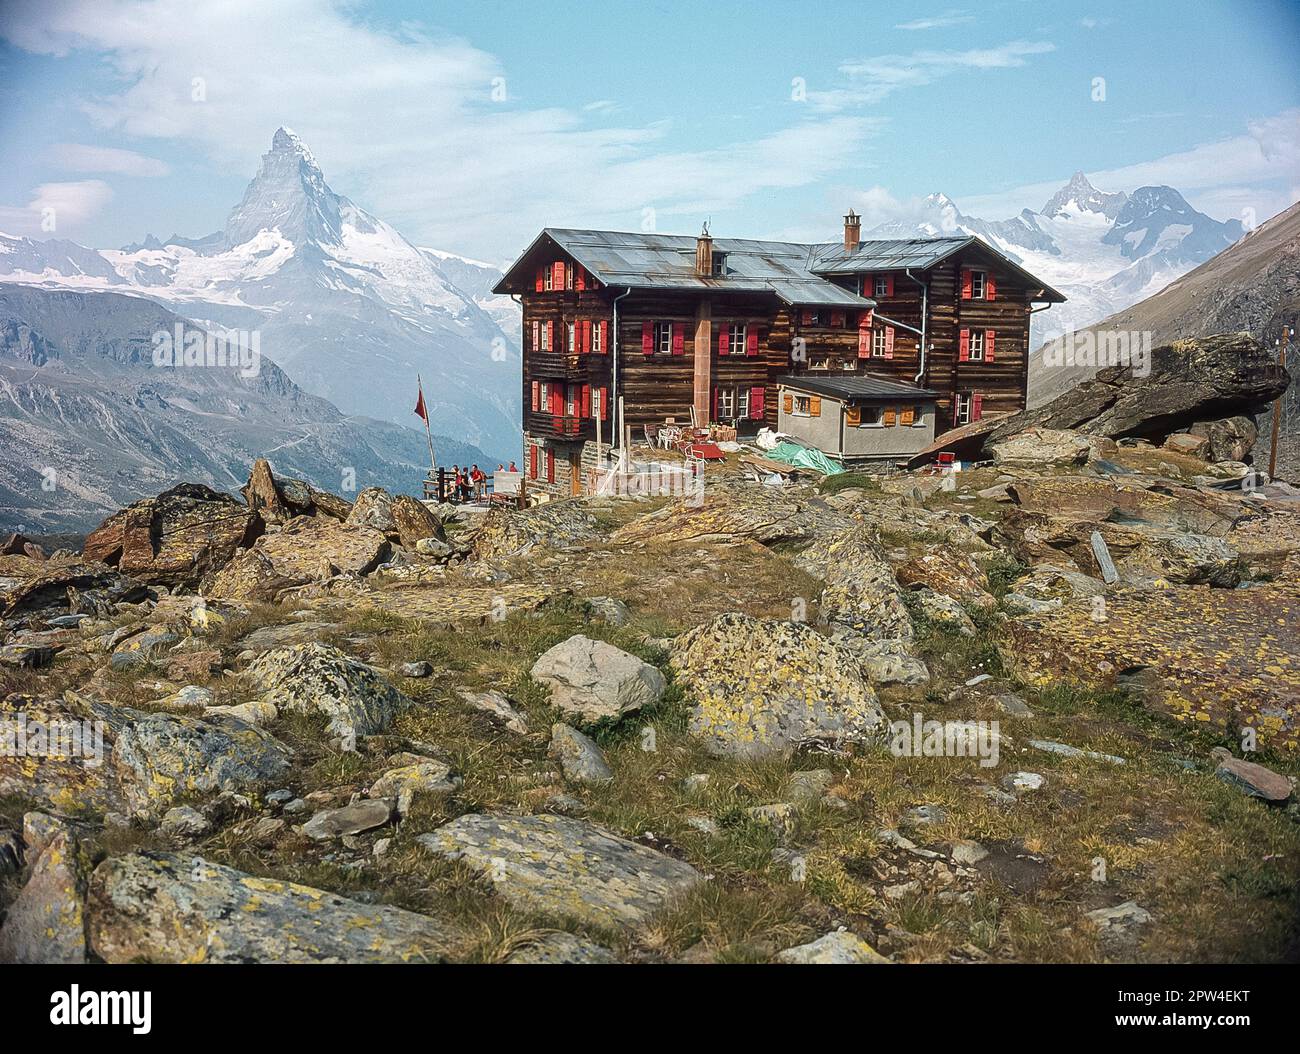 This series of images are of the mountains near the Swiss resort town of Zermatt seen here at the Fluhalp Hotel looking towards the Matterhorn Stock Photo